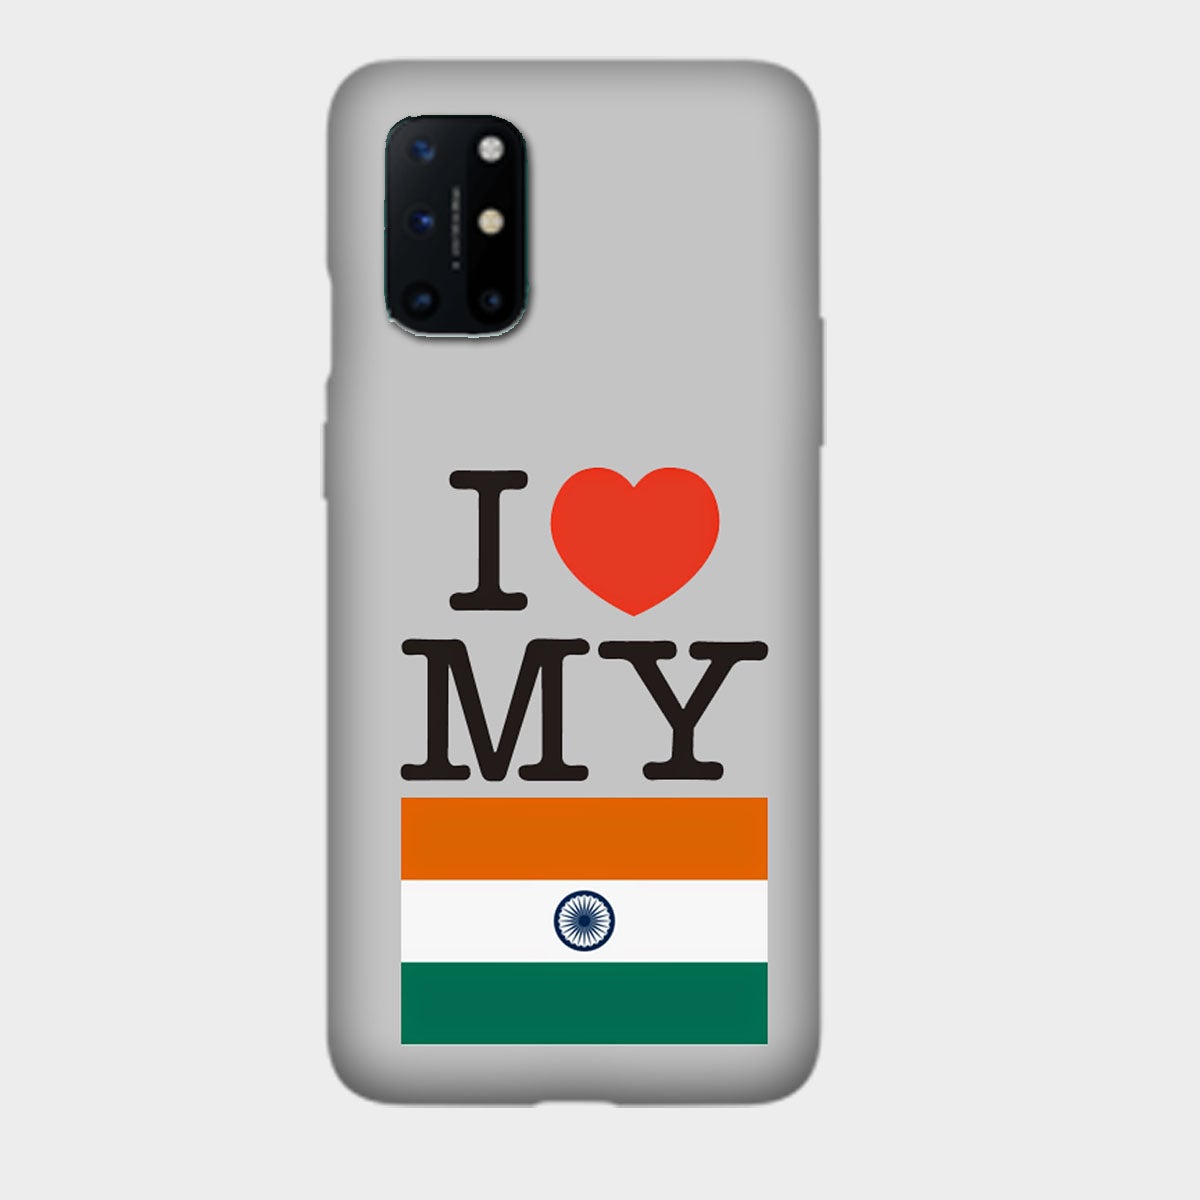 I Love My India - Mobile Phone Cover - Hard Case - OnePlus